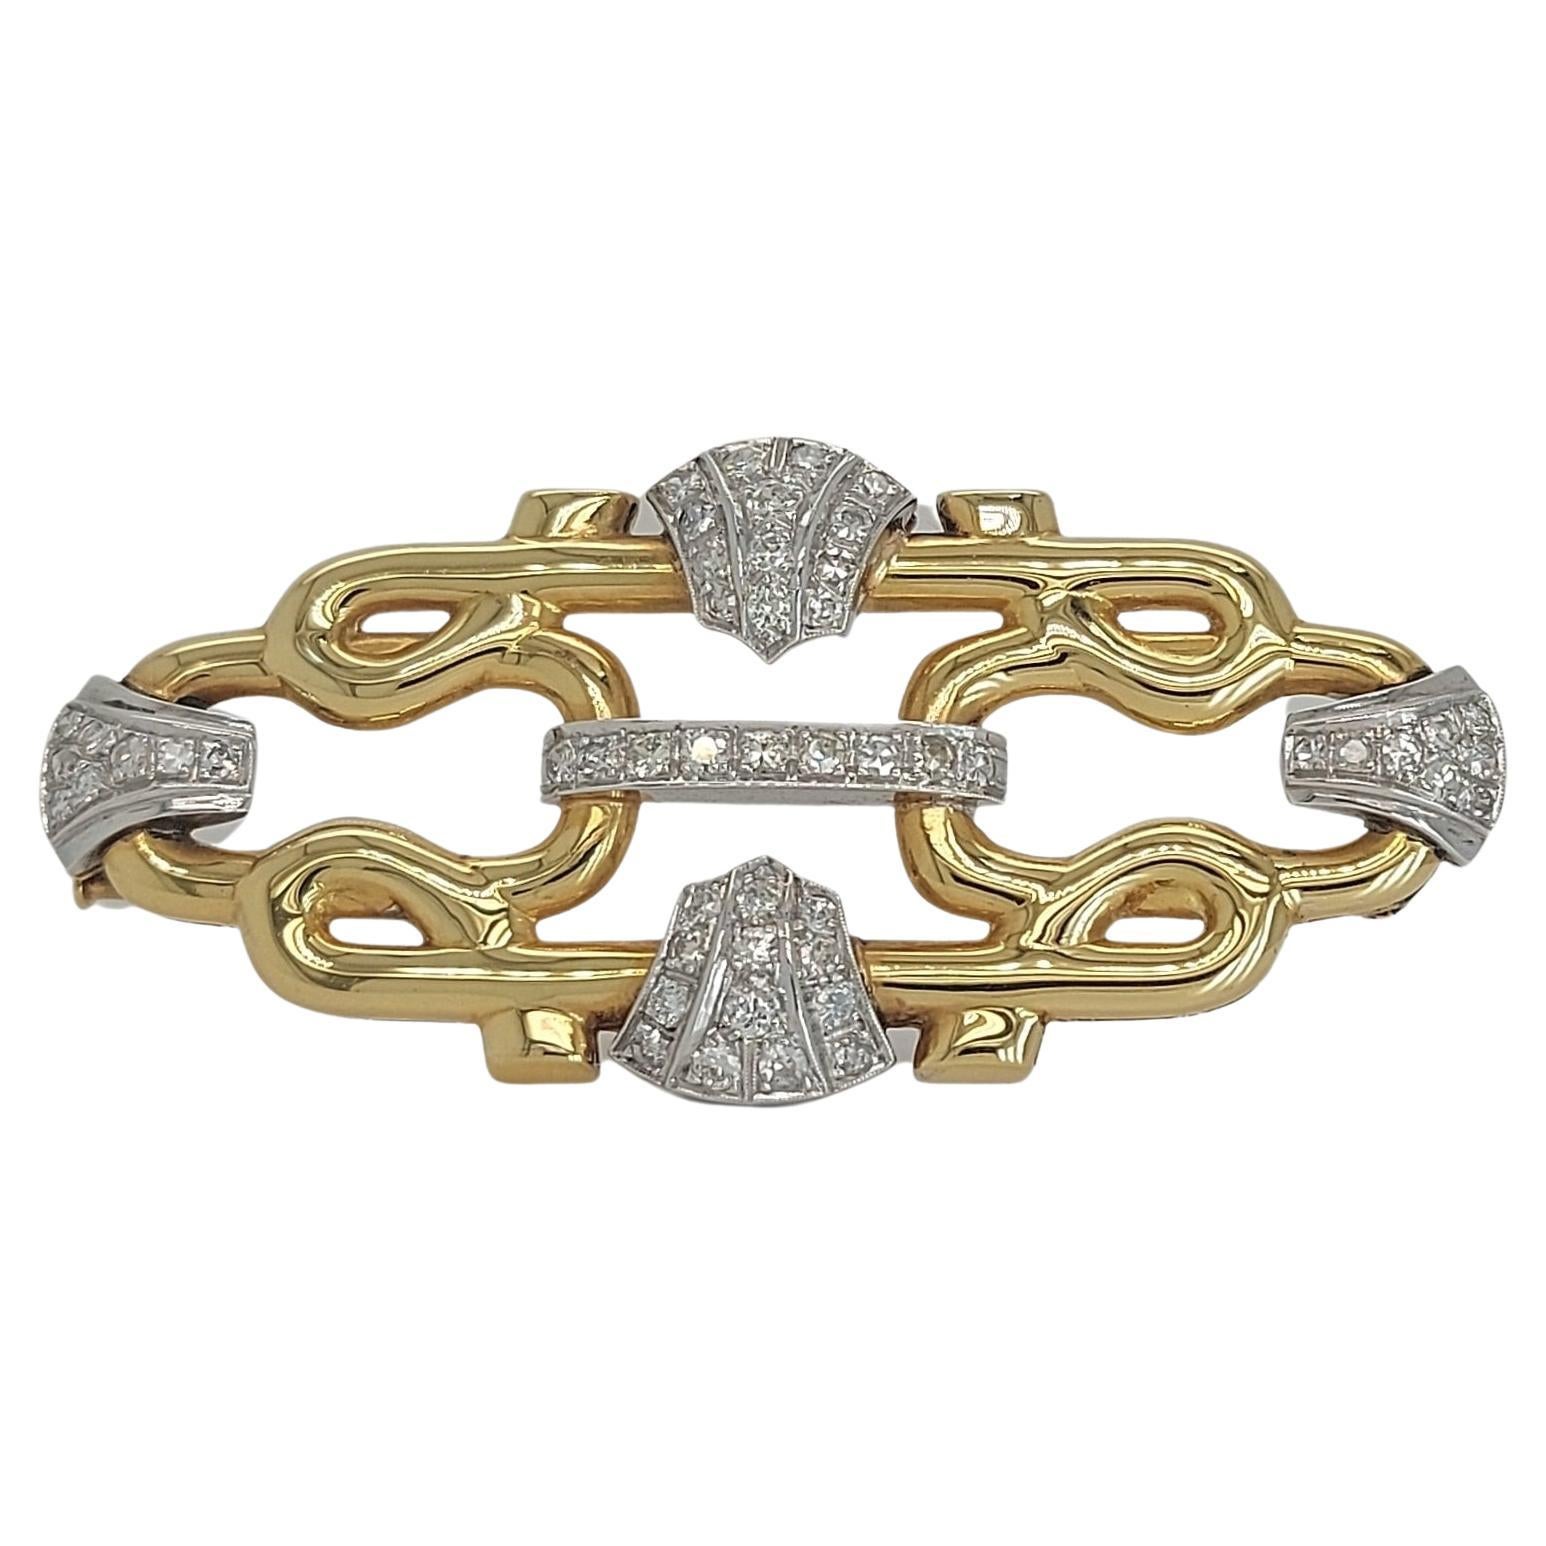 18kt Yellow & White Gold Brooch with 1.2ct Diamonds